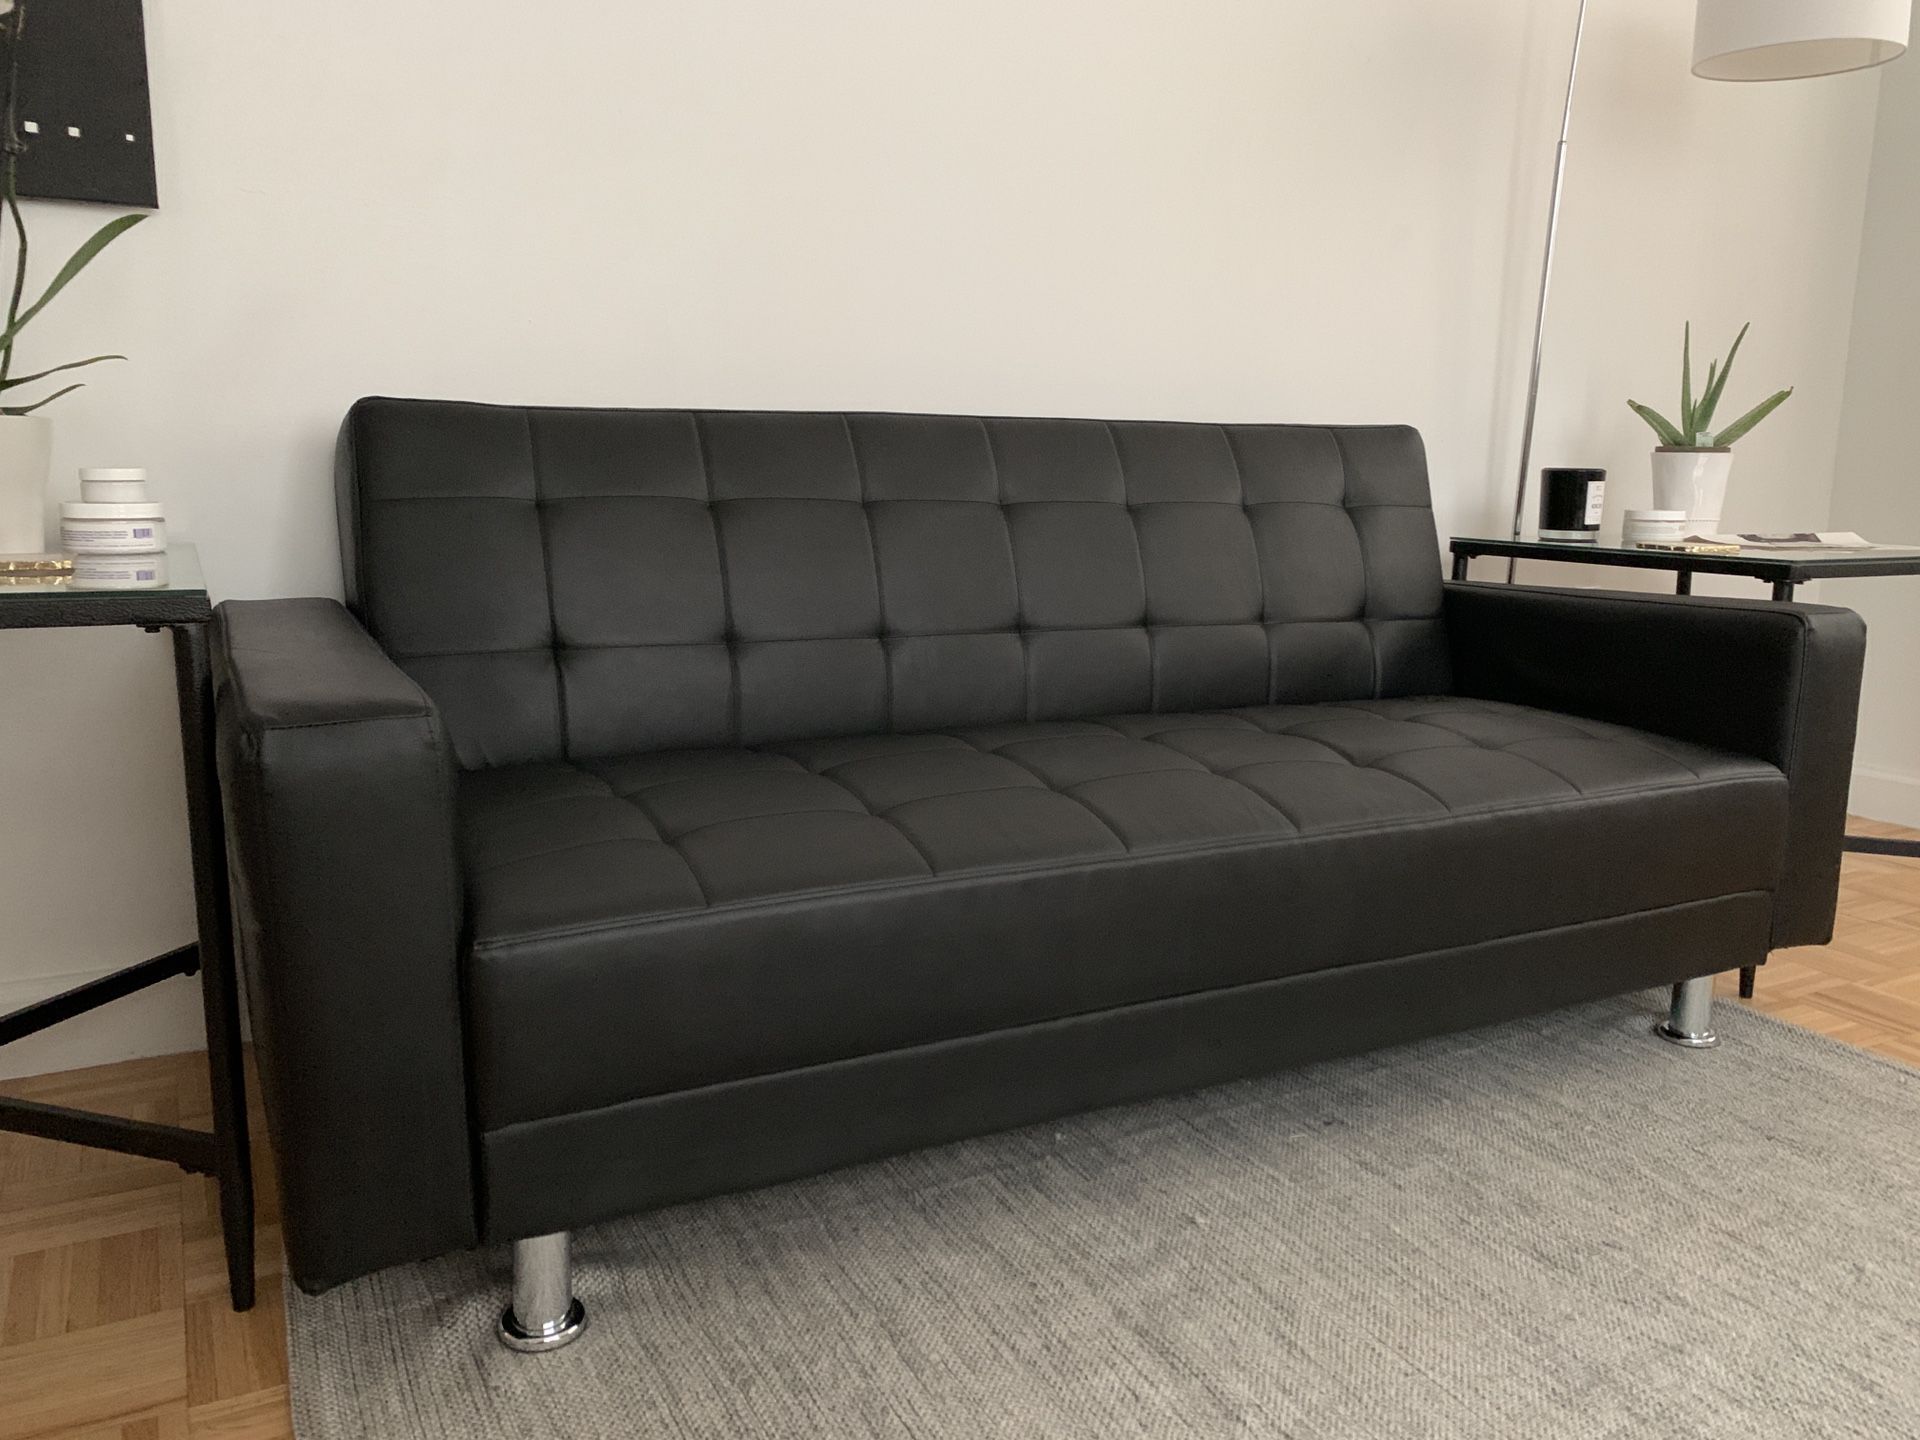 VEGAN LEATHER CONVERTIBLE COUCH FUTON